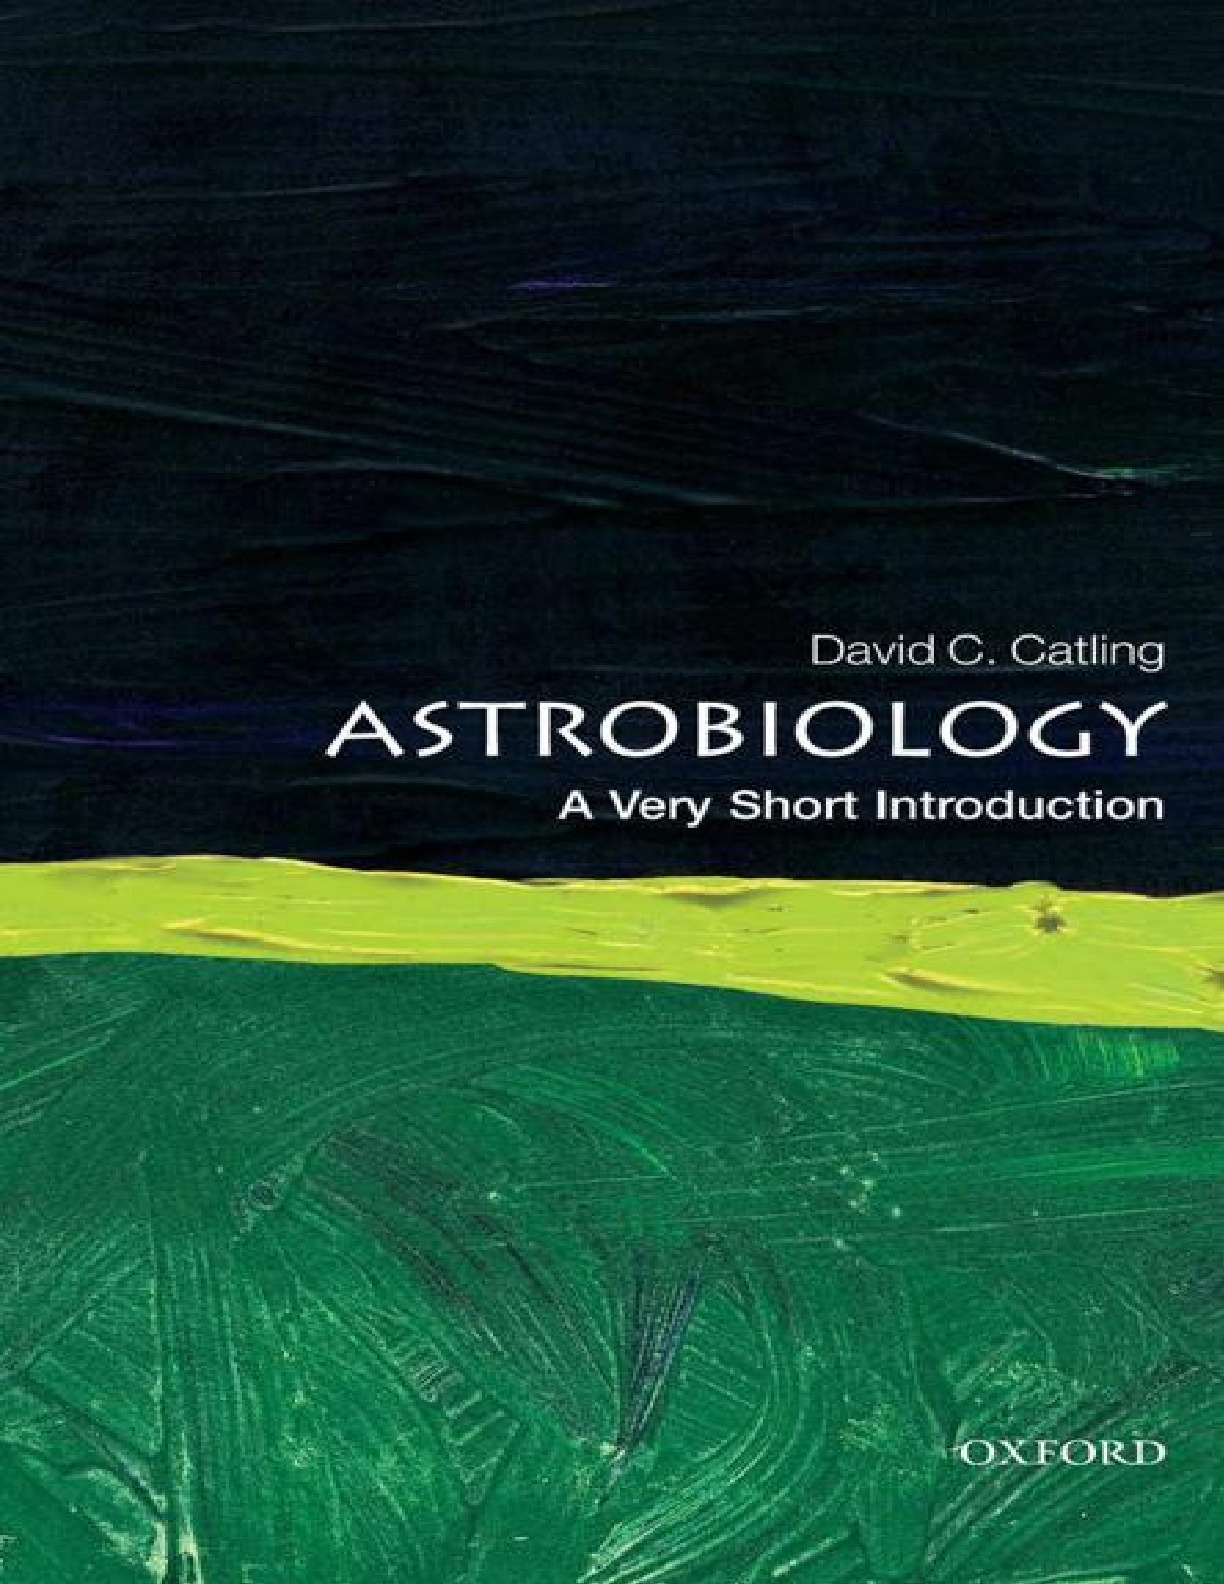 Astrobiology_ A Very Short Introduction ( PDFDrive.com )